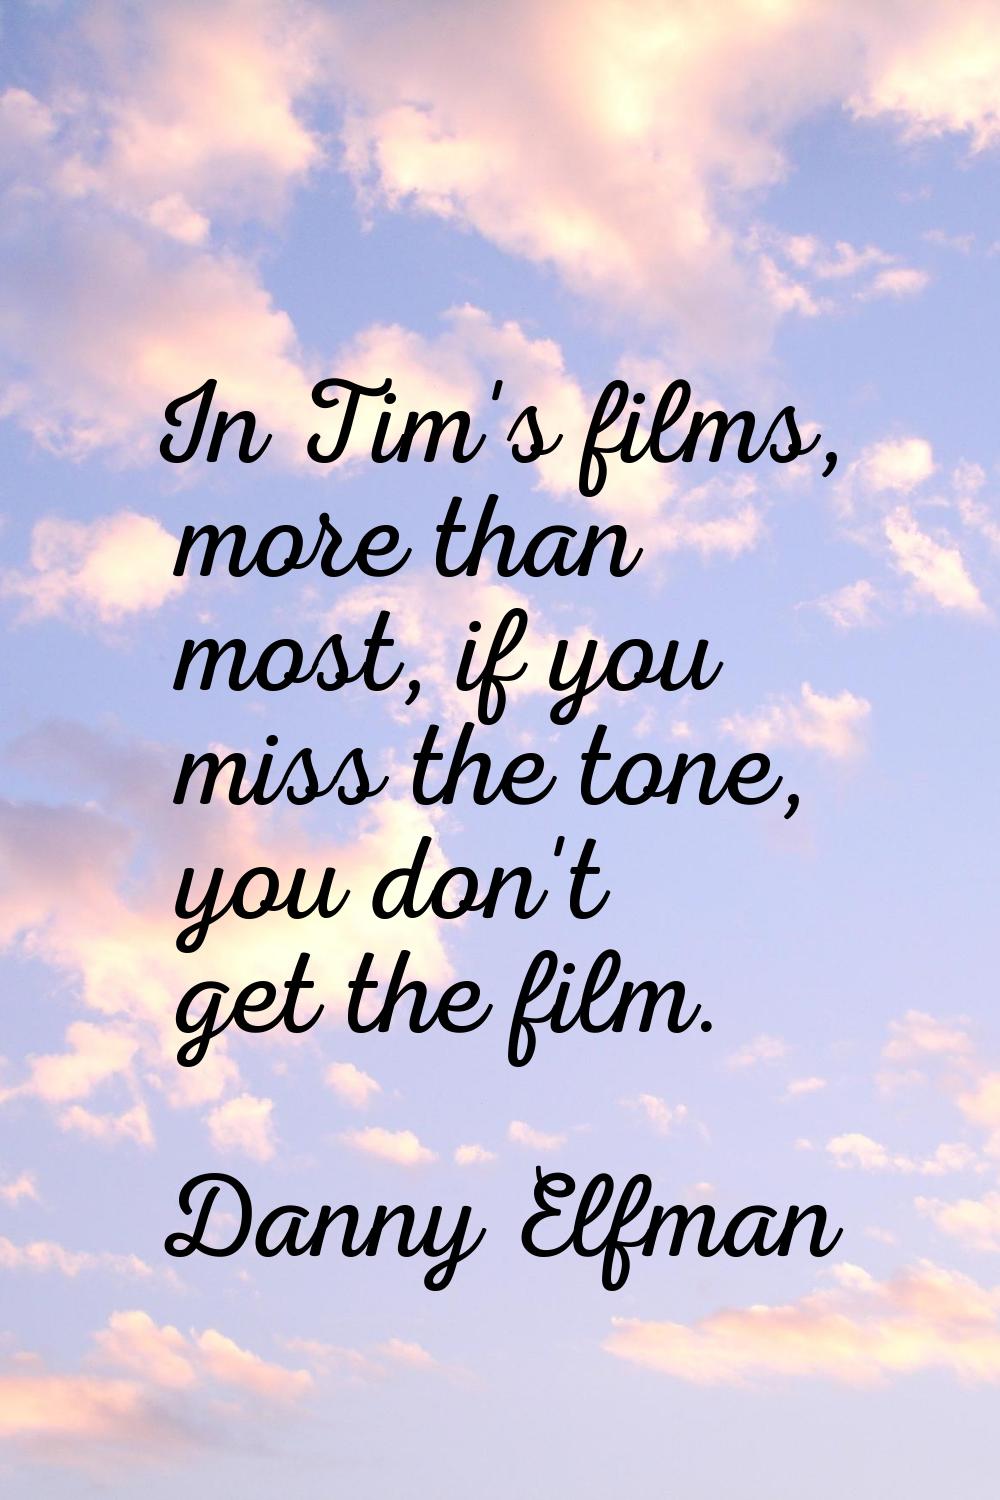 In Tim's films, more than most, if you miss the tone, you don't get the film.